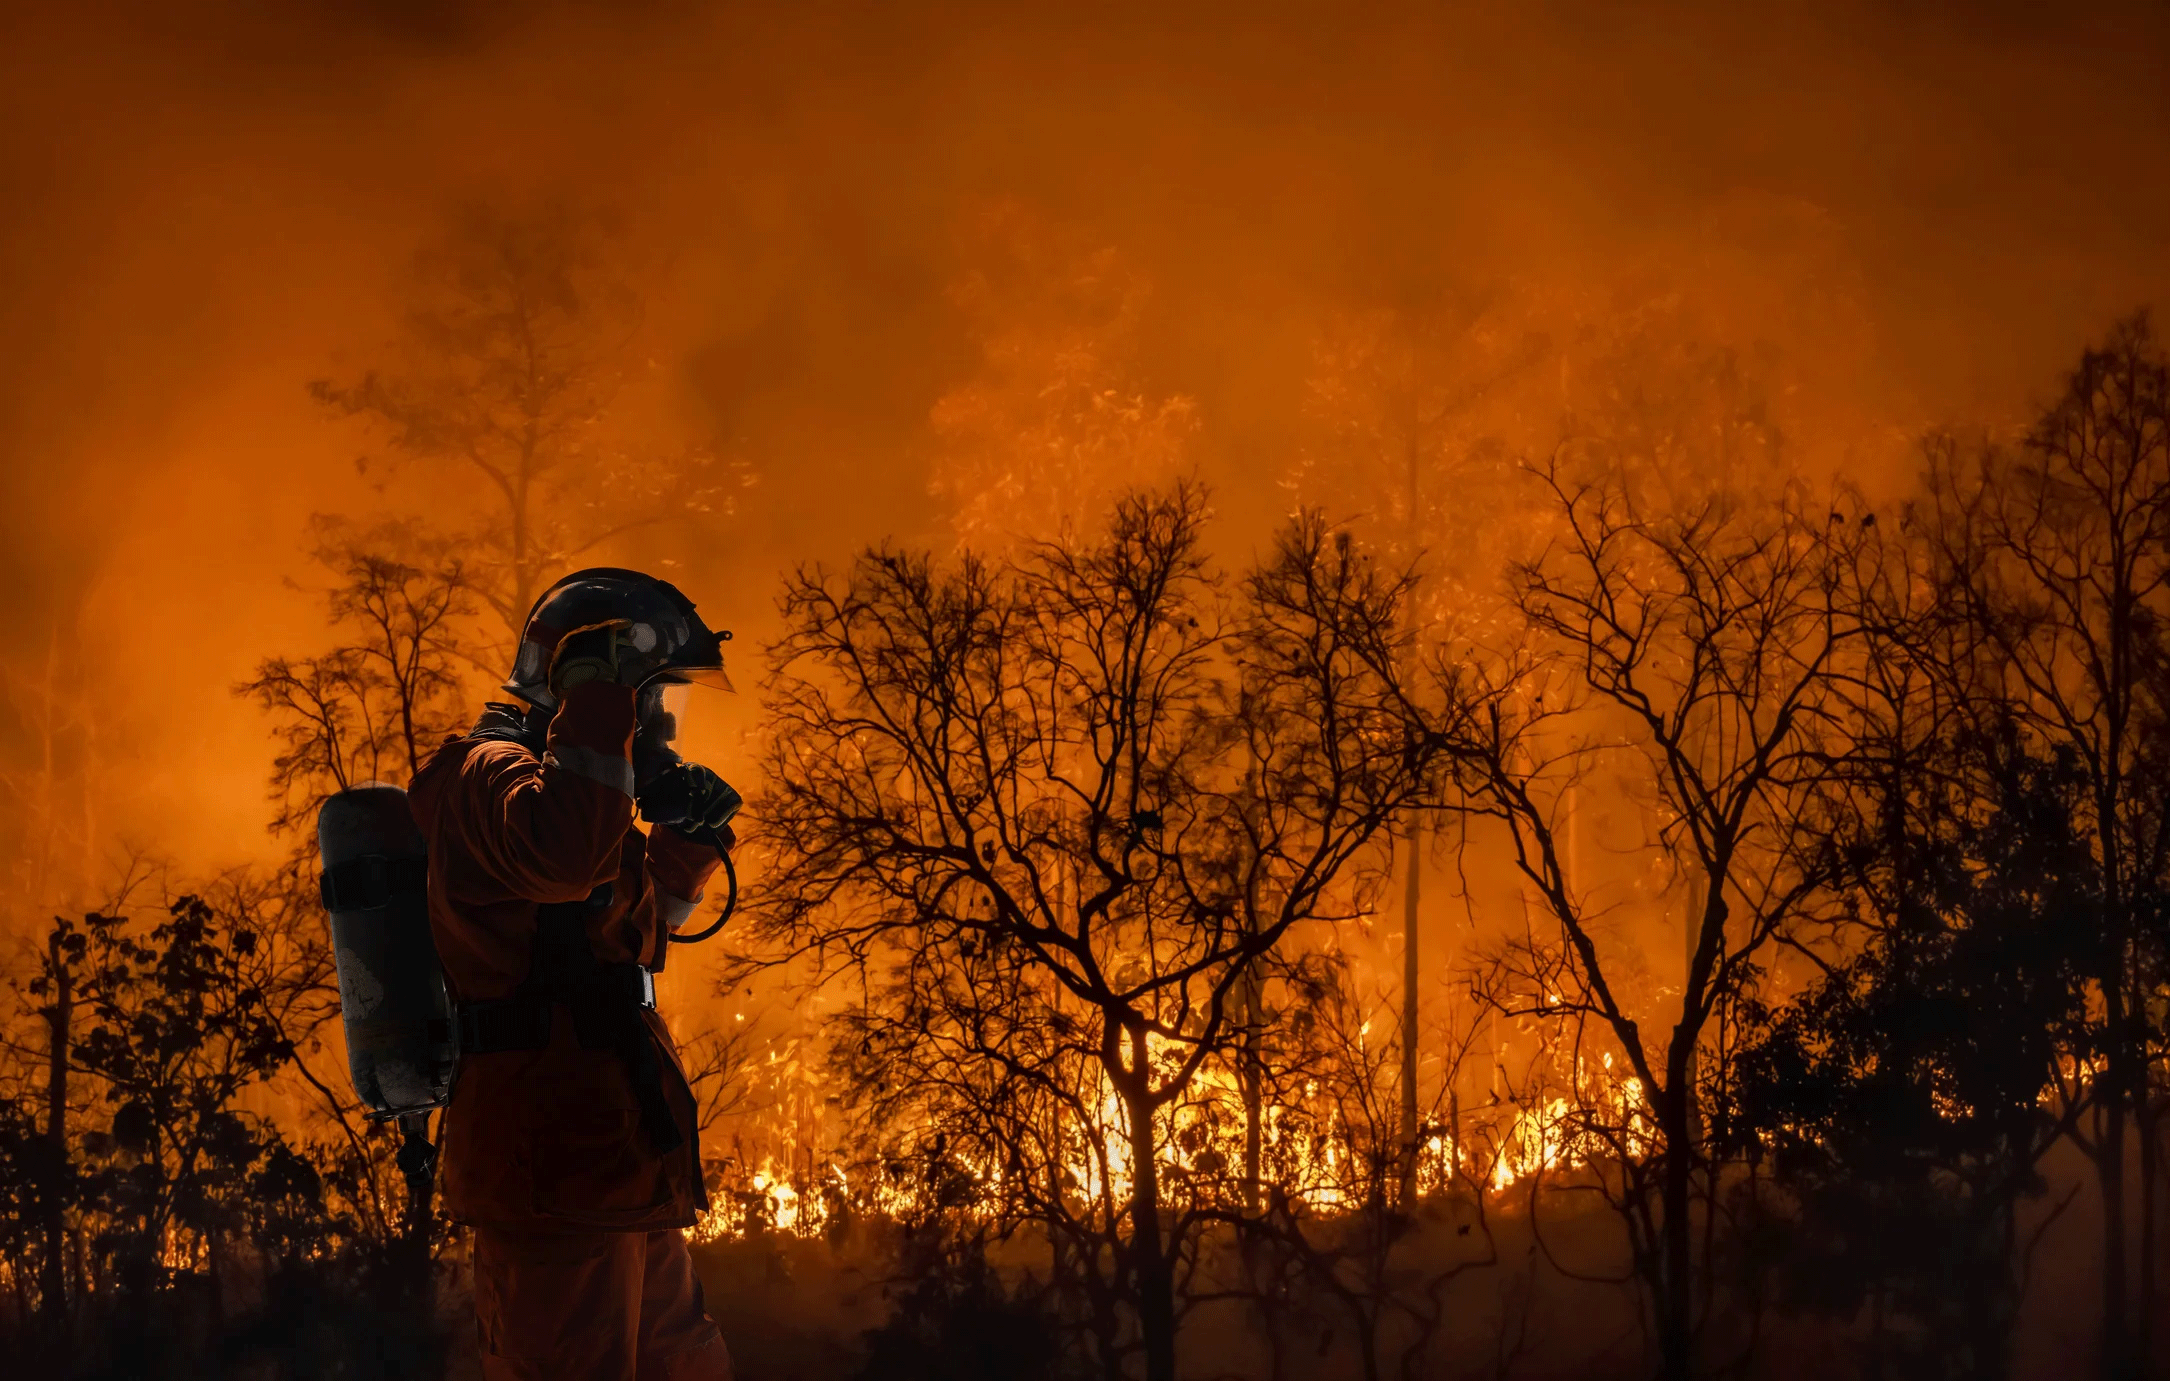 Another UC Davis project funded through the California Climate Action Grants will assess exposure, health monitoring and cancer control among wildland firefighters. (Getty)